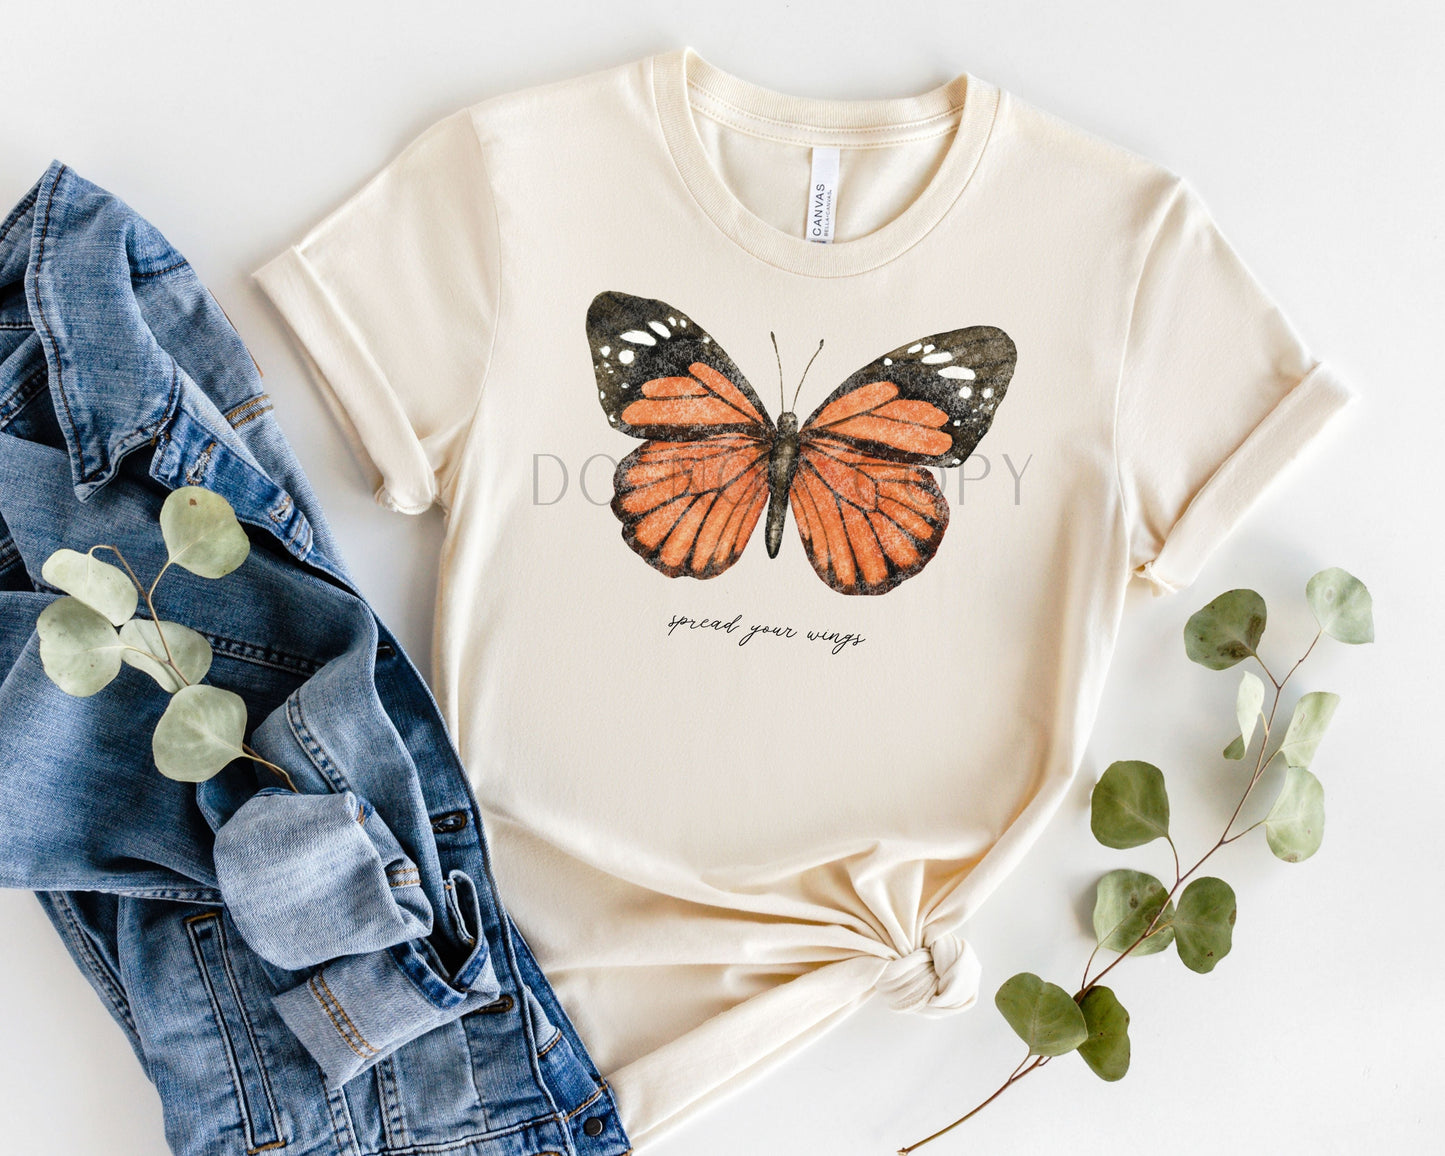 Spread Your Wings Graphic Tee